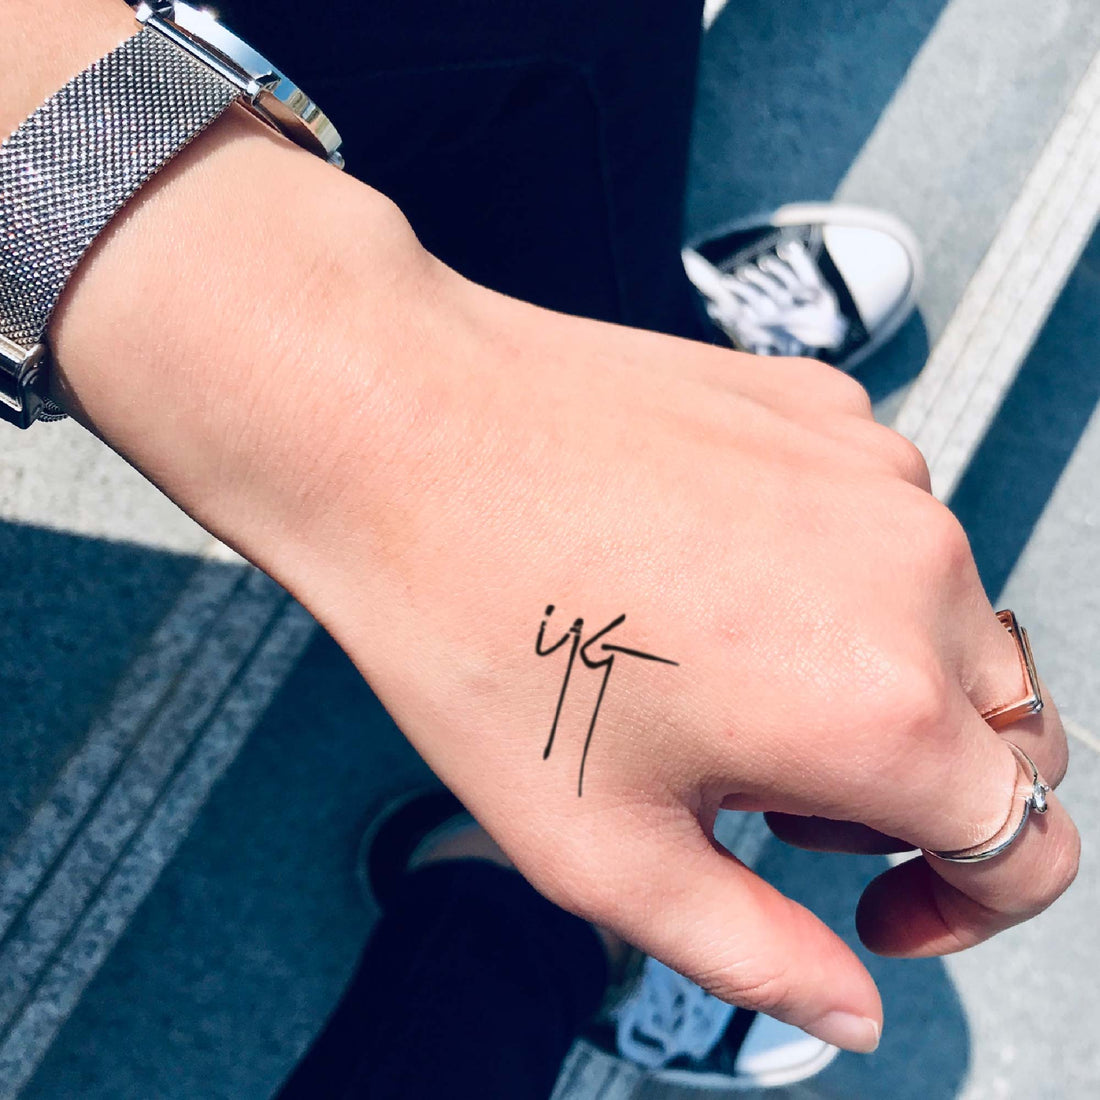 YG custom temporary tattoo sticker design idea inspiration meanings removal arm wrist hand words font name signature calligraphy lyrics tour concert outfits merch accessory gift souvenir costumes wear dress up code